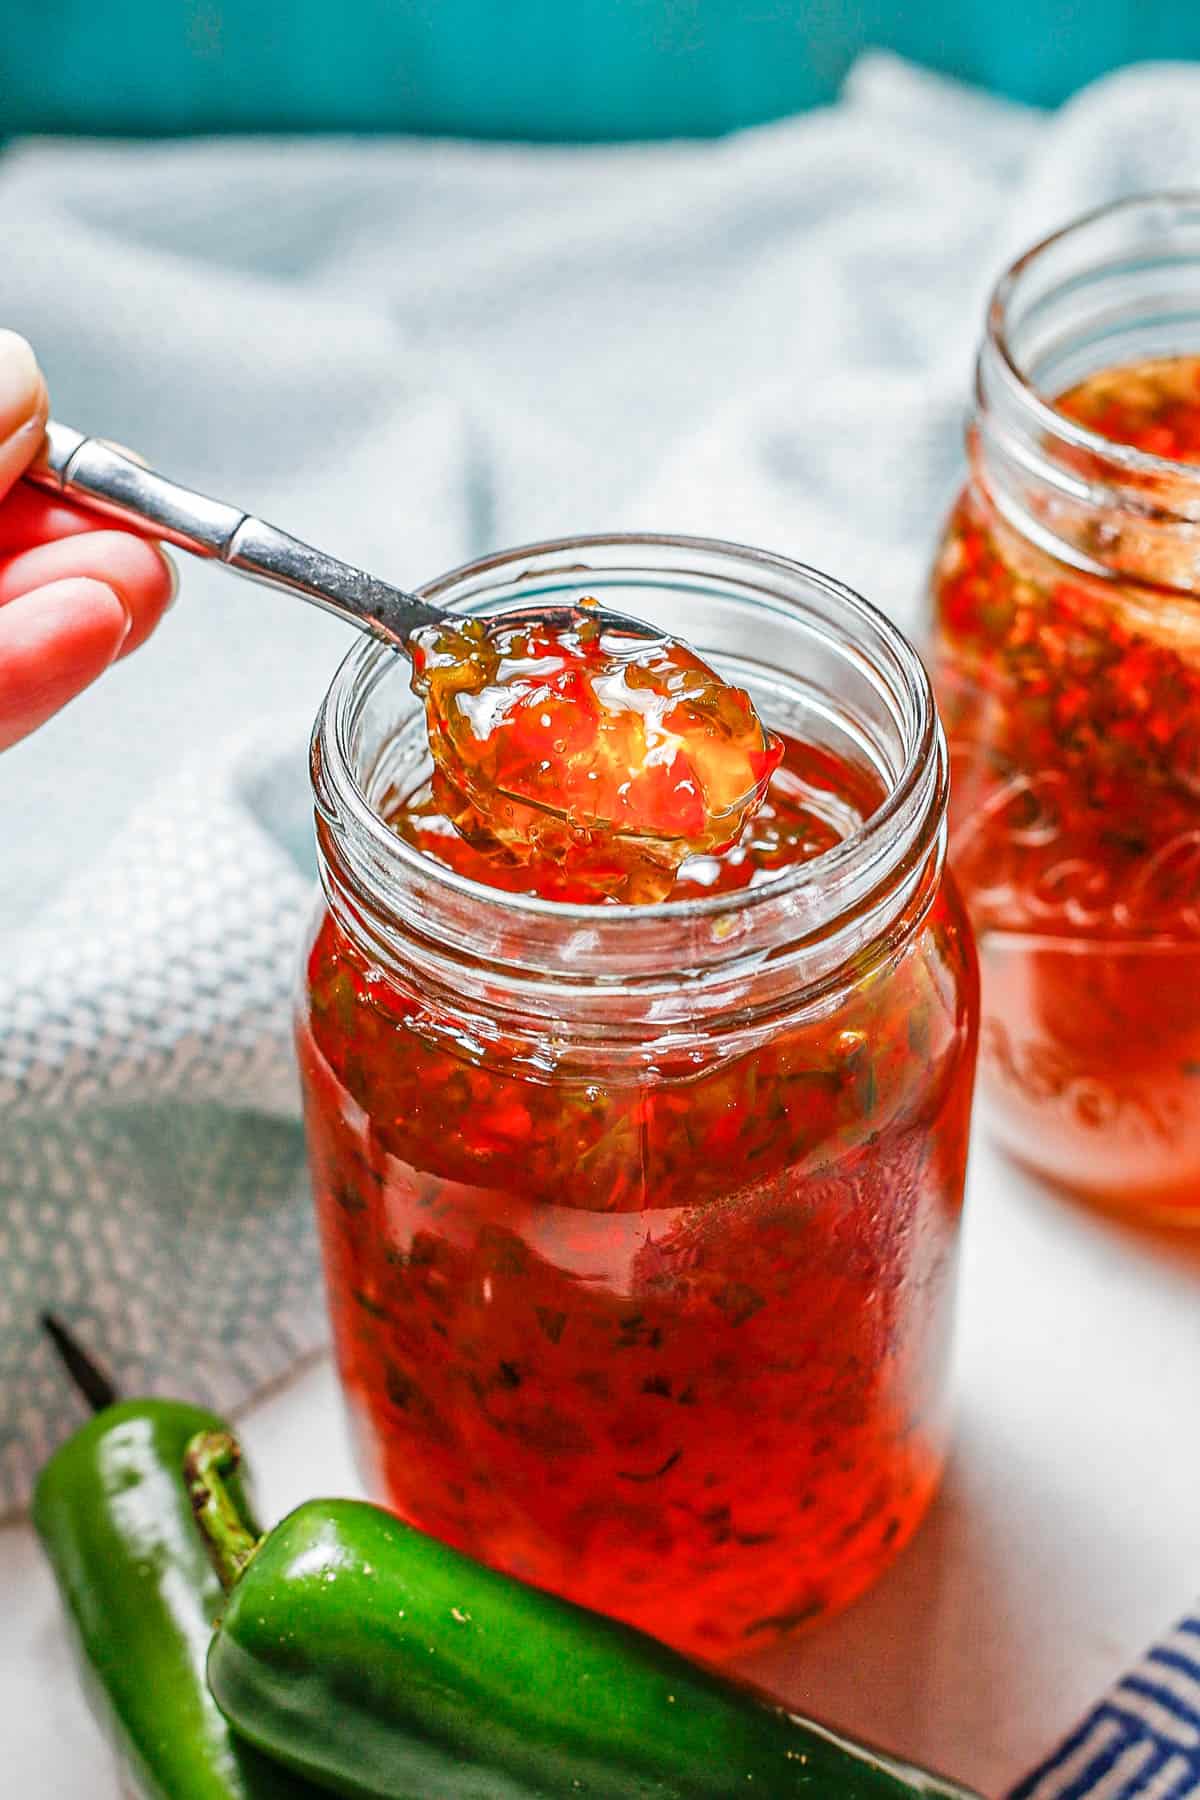 A spoon lifting up some pepper jelly from a glass jar.